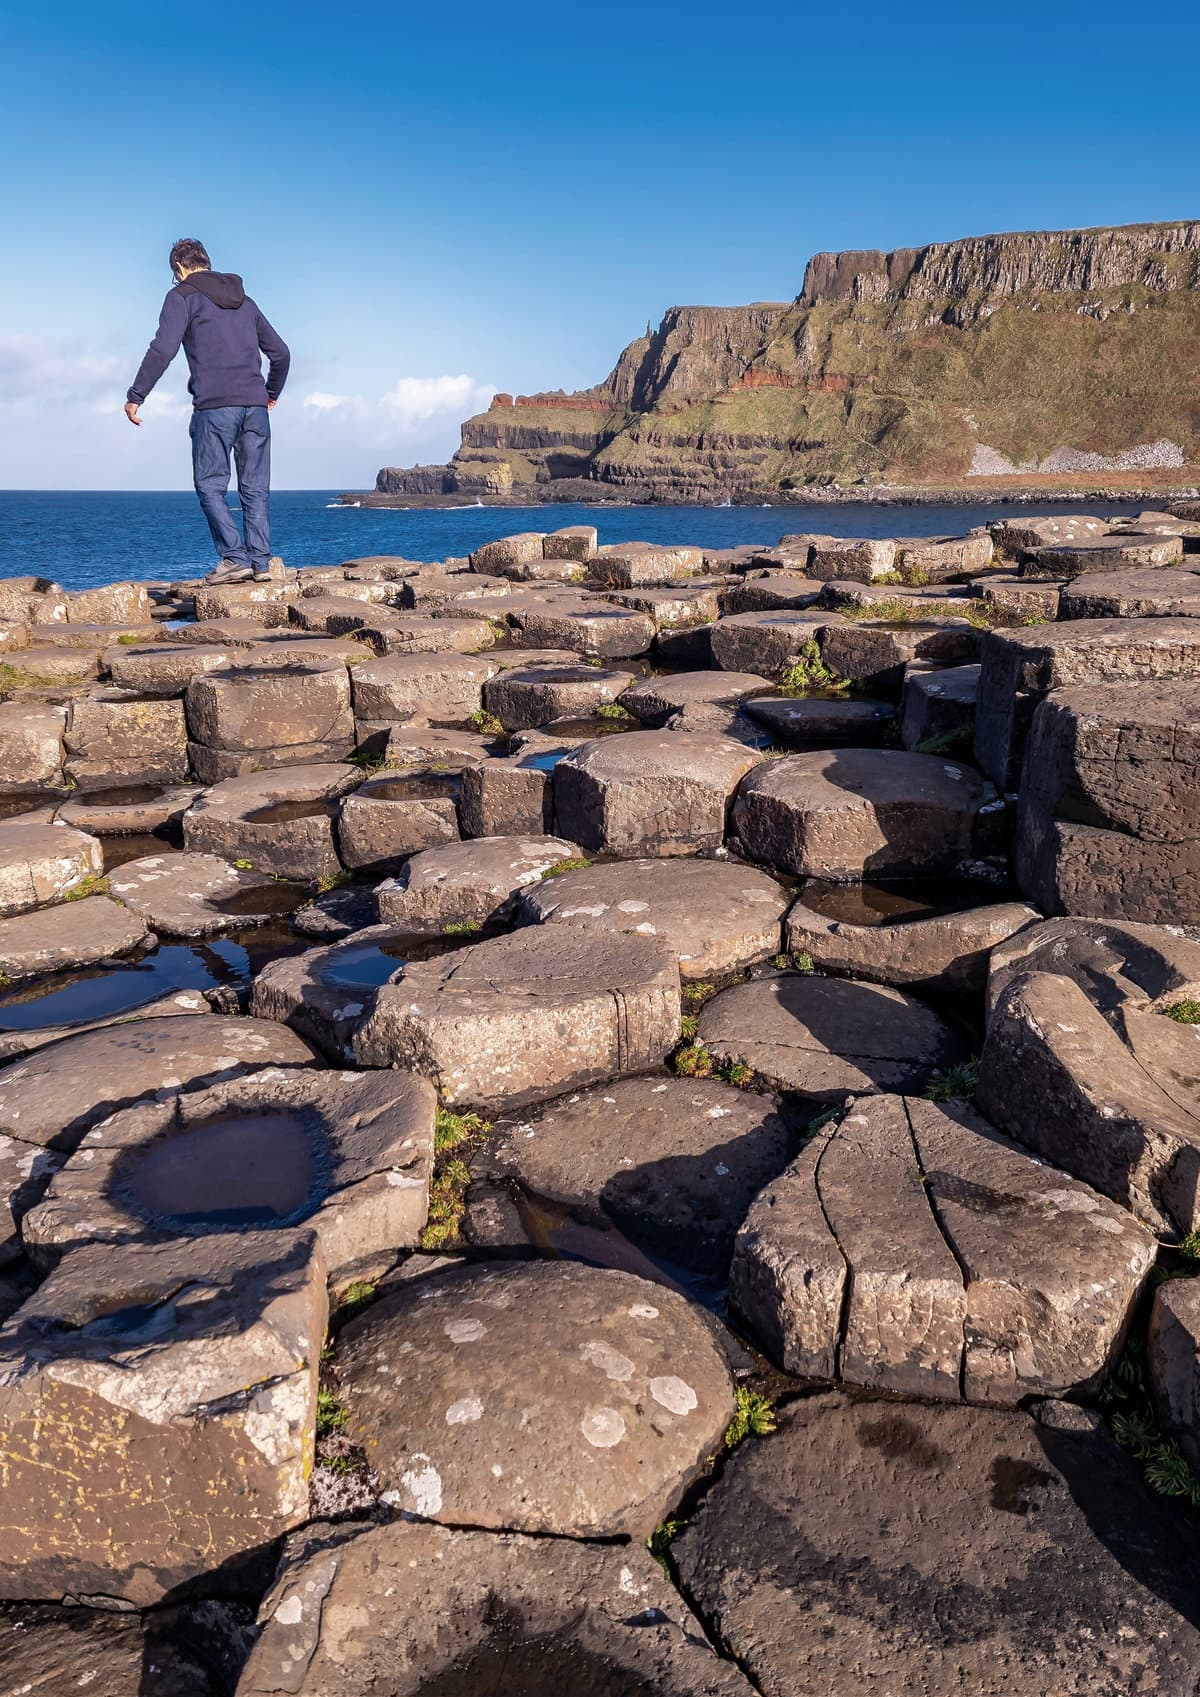 A tourist in the Giant's Causeway in Northern Ireland